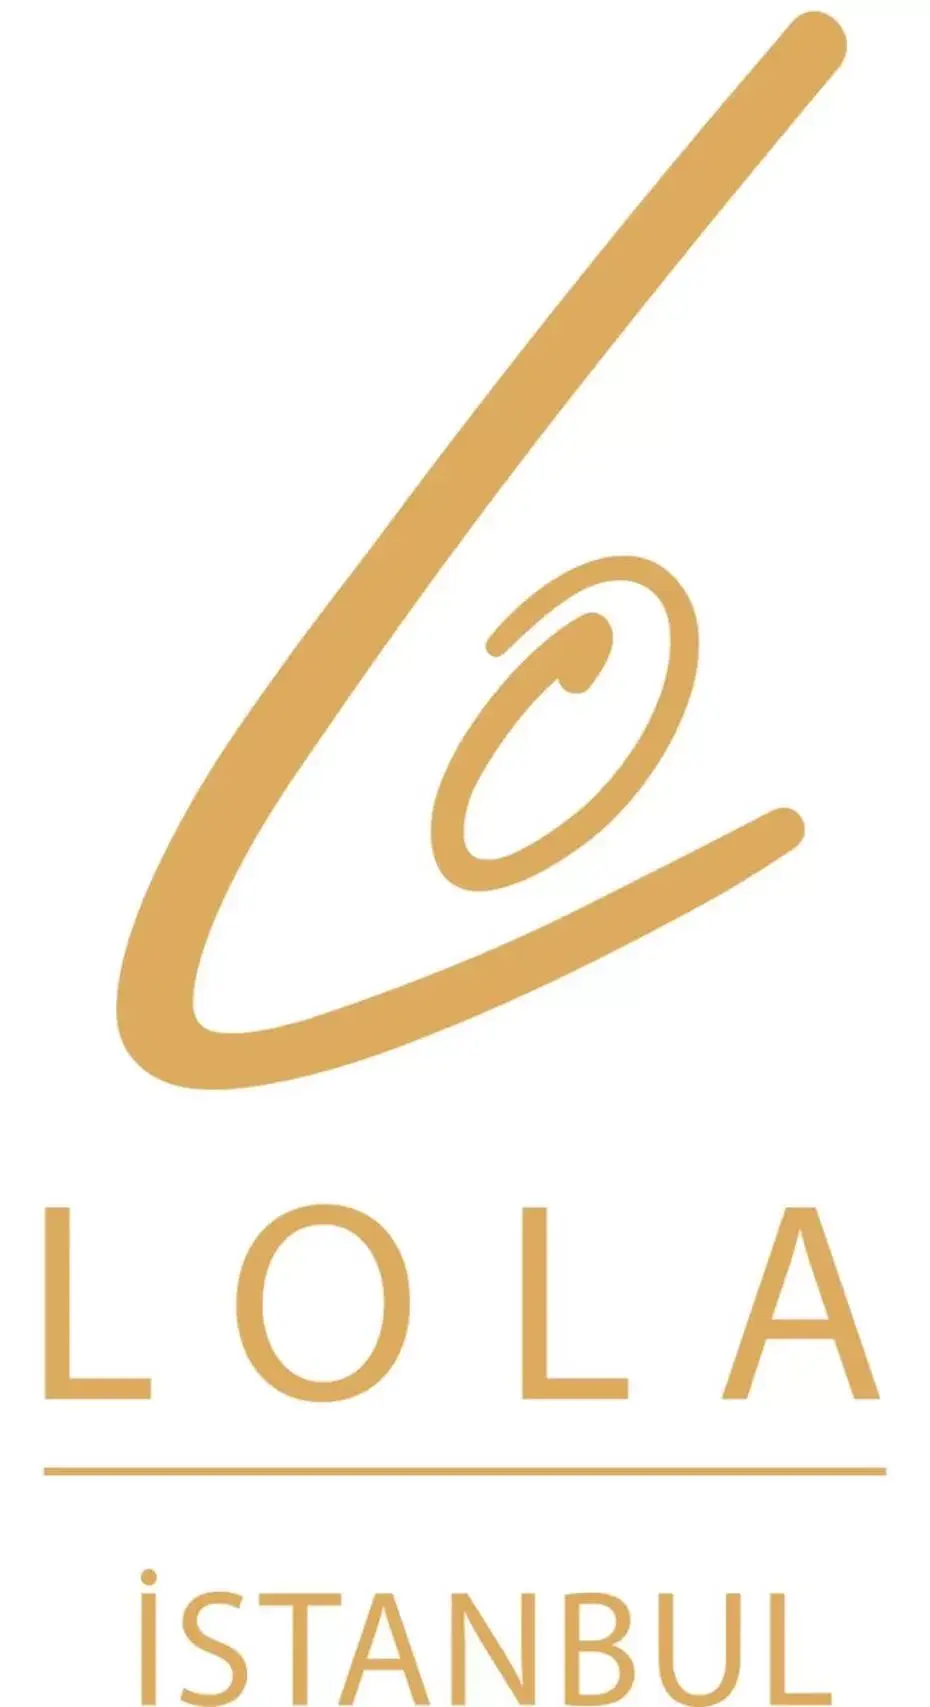 Property logo or sign in The Lola Hotel